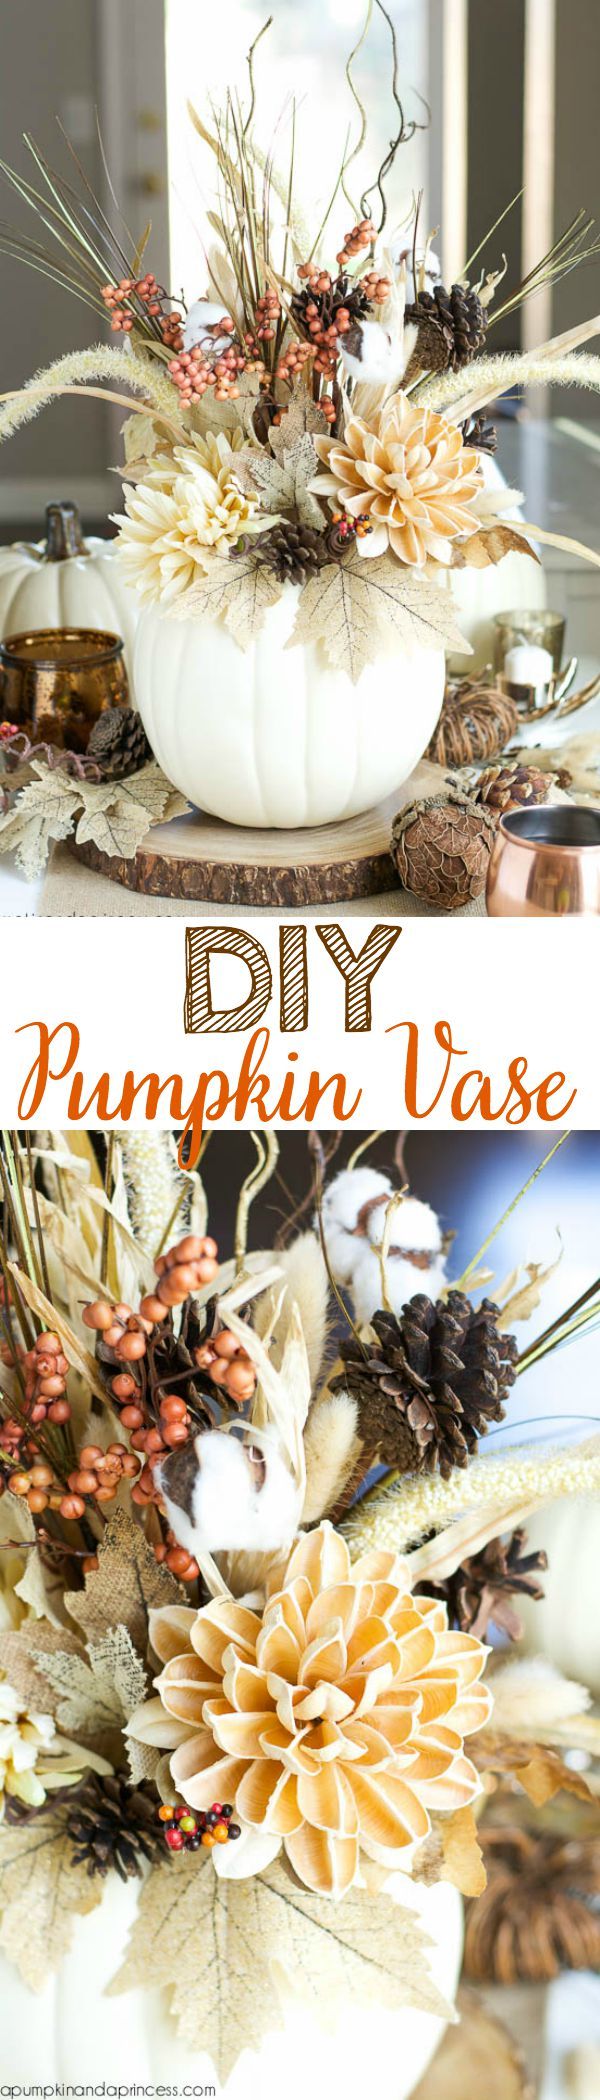 Look here how a pumpkin can be transformed into a gorgeous Thanksgiving vase.